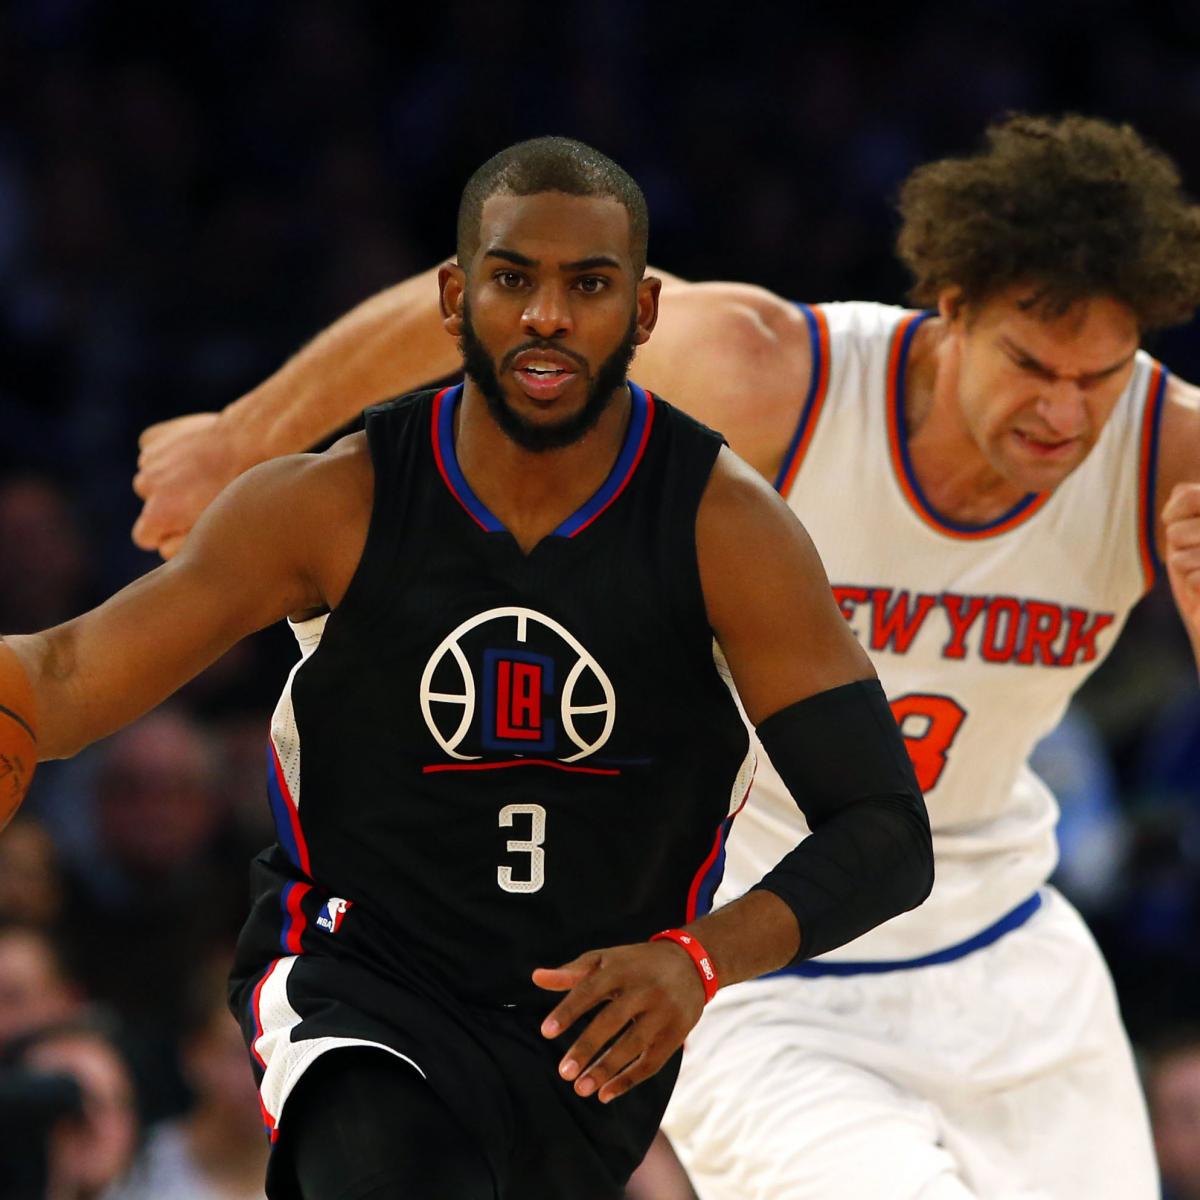 Clippers vs. Knicks: Score, Video Highlights and Recap from Jan. 22